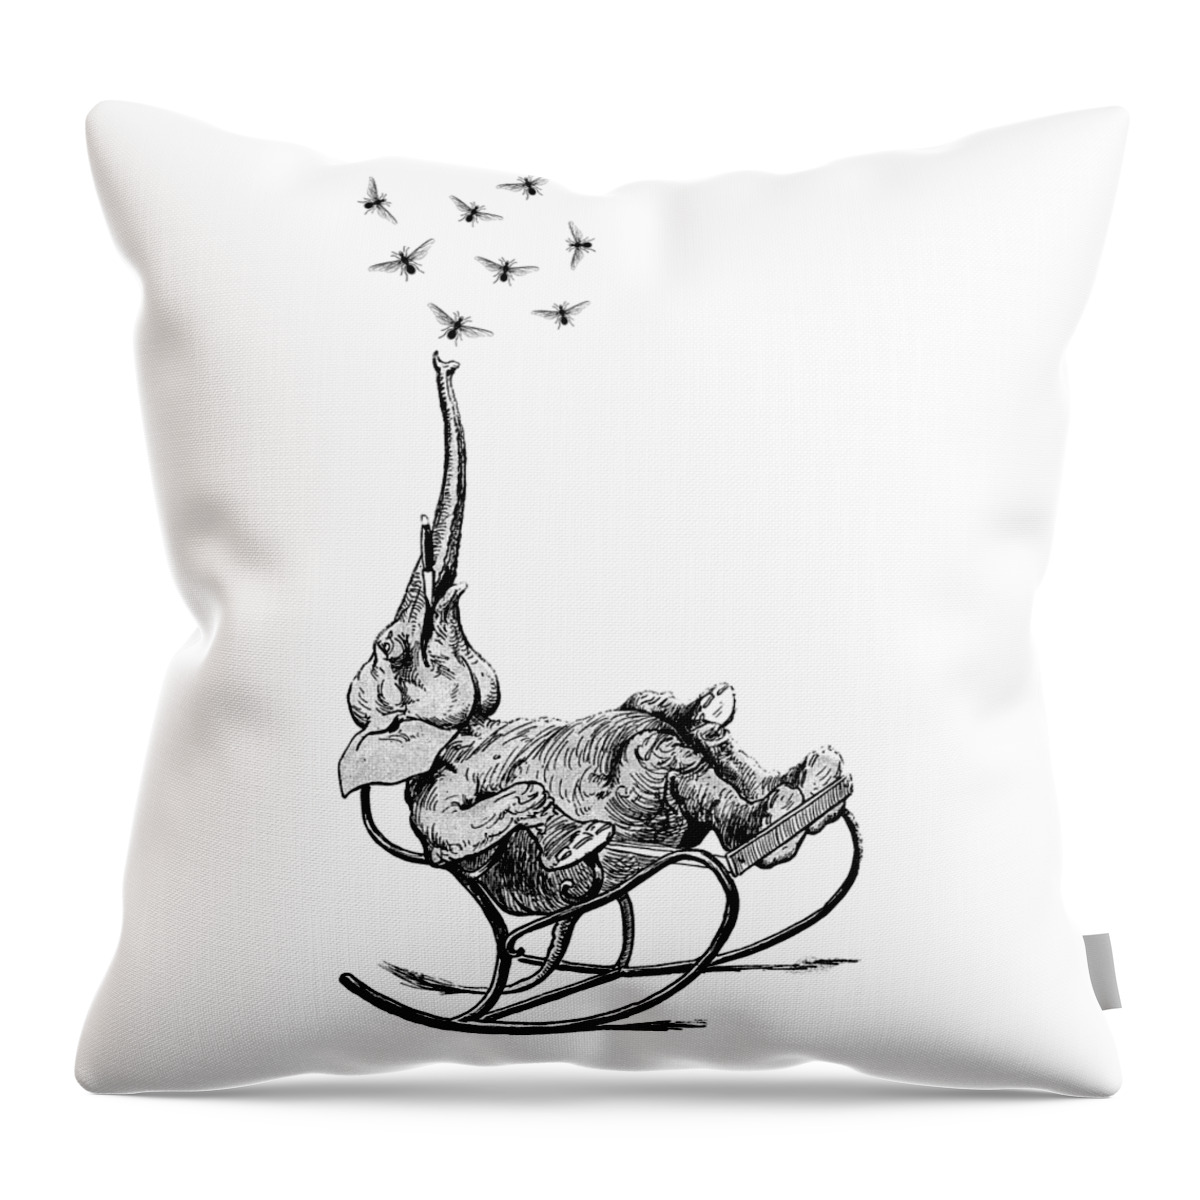 Elephant Throw Pillow featuring the digital art Blowing Elephant by Madame Memento